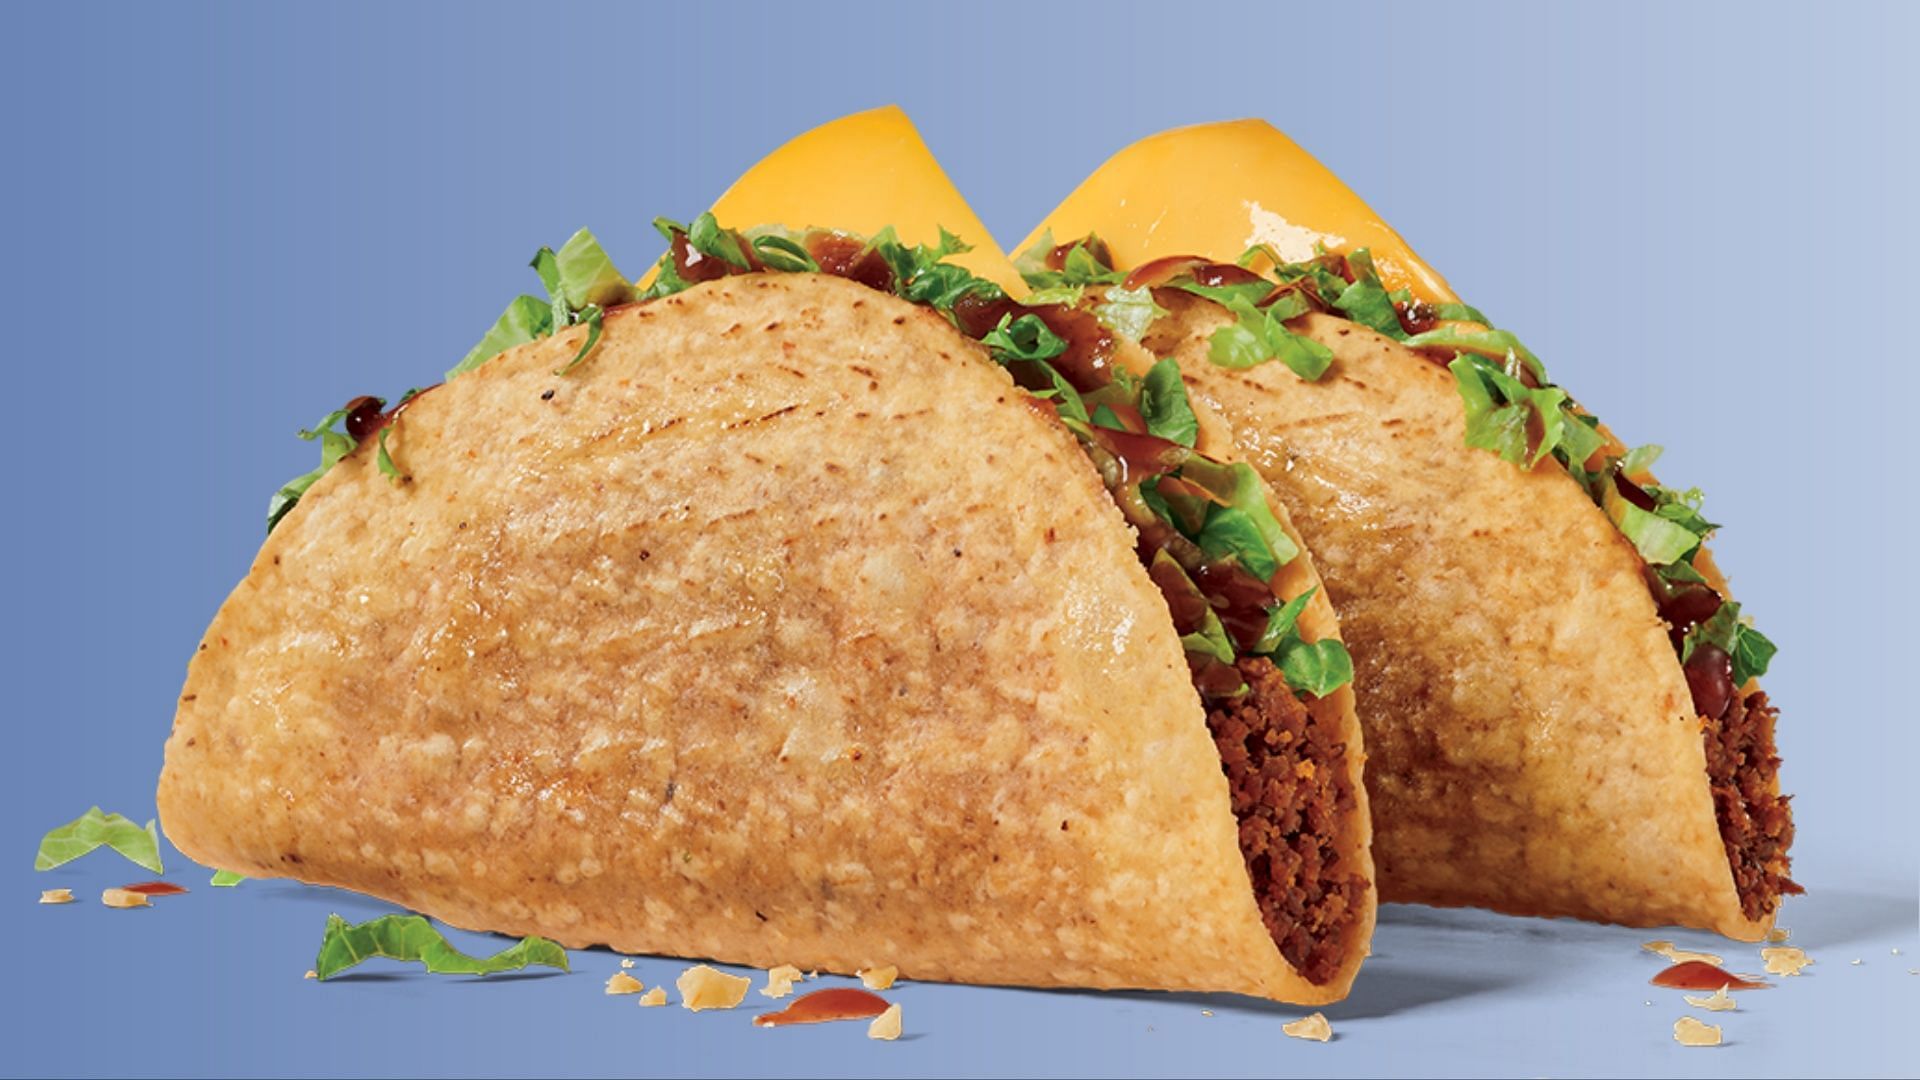 Jack in the Box to offer free Crunchy Tacos to Jack Pack members every Tuesday (Image via Jack in the Box)